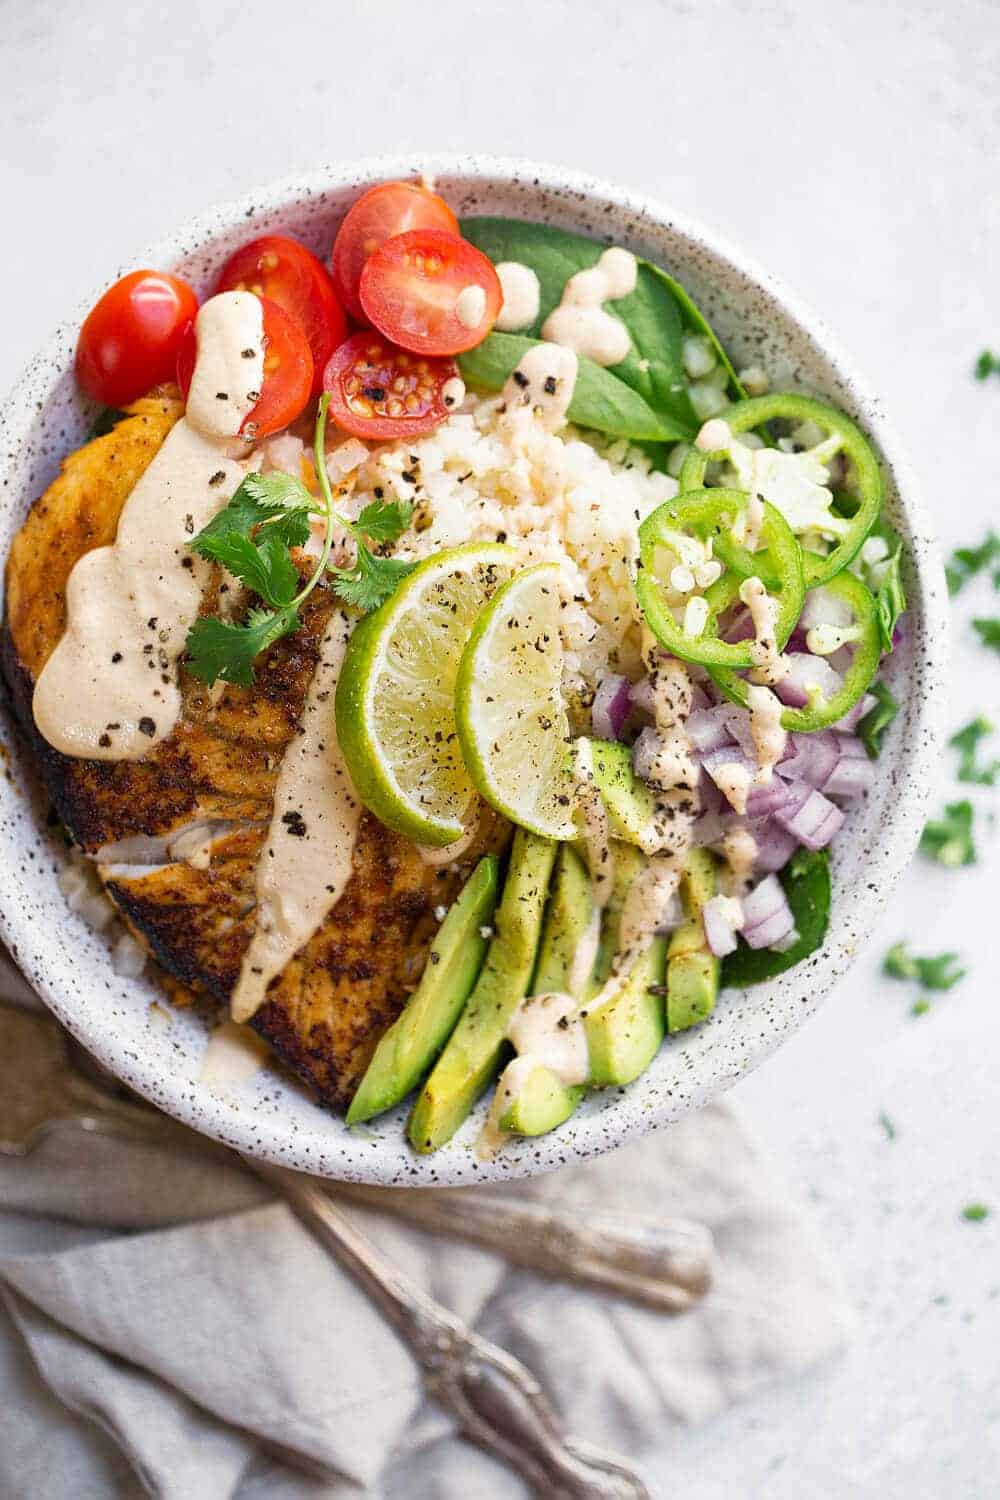 This recipe for Paleo Fish Taco Bowls will leave you wanting more! Healthy whole30 fish taco bowl that is served on a bed of lettuce and cauliflower rice, topped off with a creamy chipotle sauce! Only 10 minutes to prepare! whole30 meal plan. Easy whole30 dinner recipes. Whole30 recipes. Whole30 lunch. Whole30 meal planning. Whole30 meal prep. Healthy paleo meals. Healthy Whole30 recipes. Easy Whole30 recipes. Easy whole30 dinner recipes...